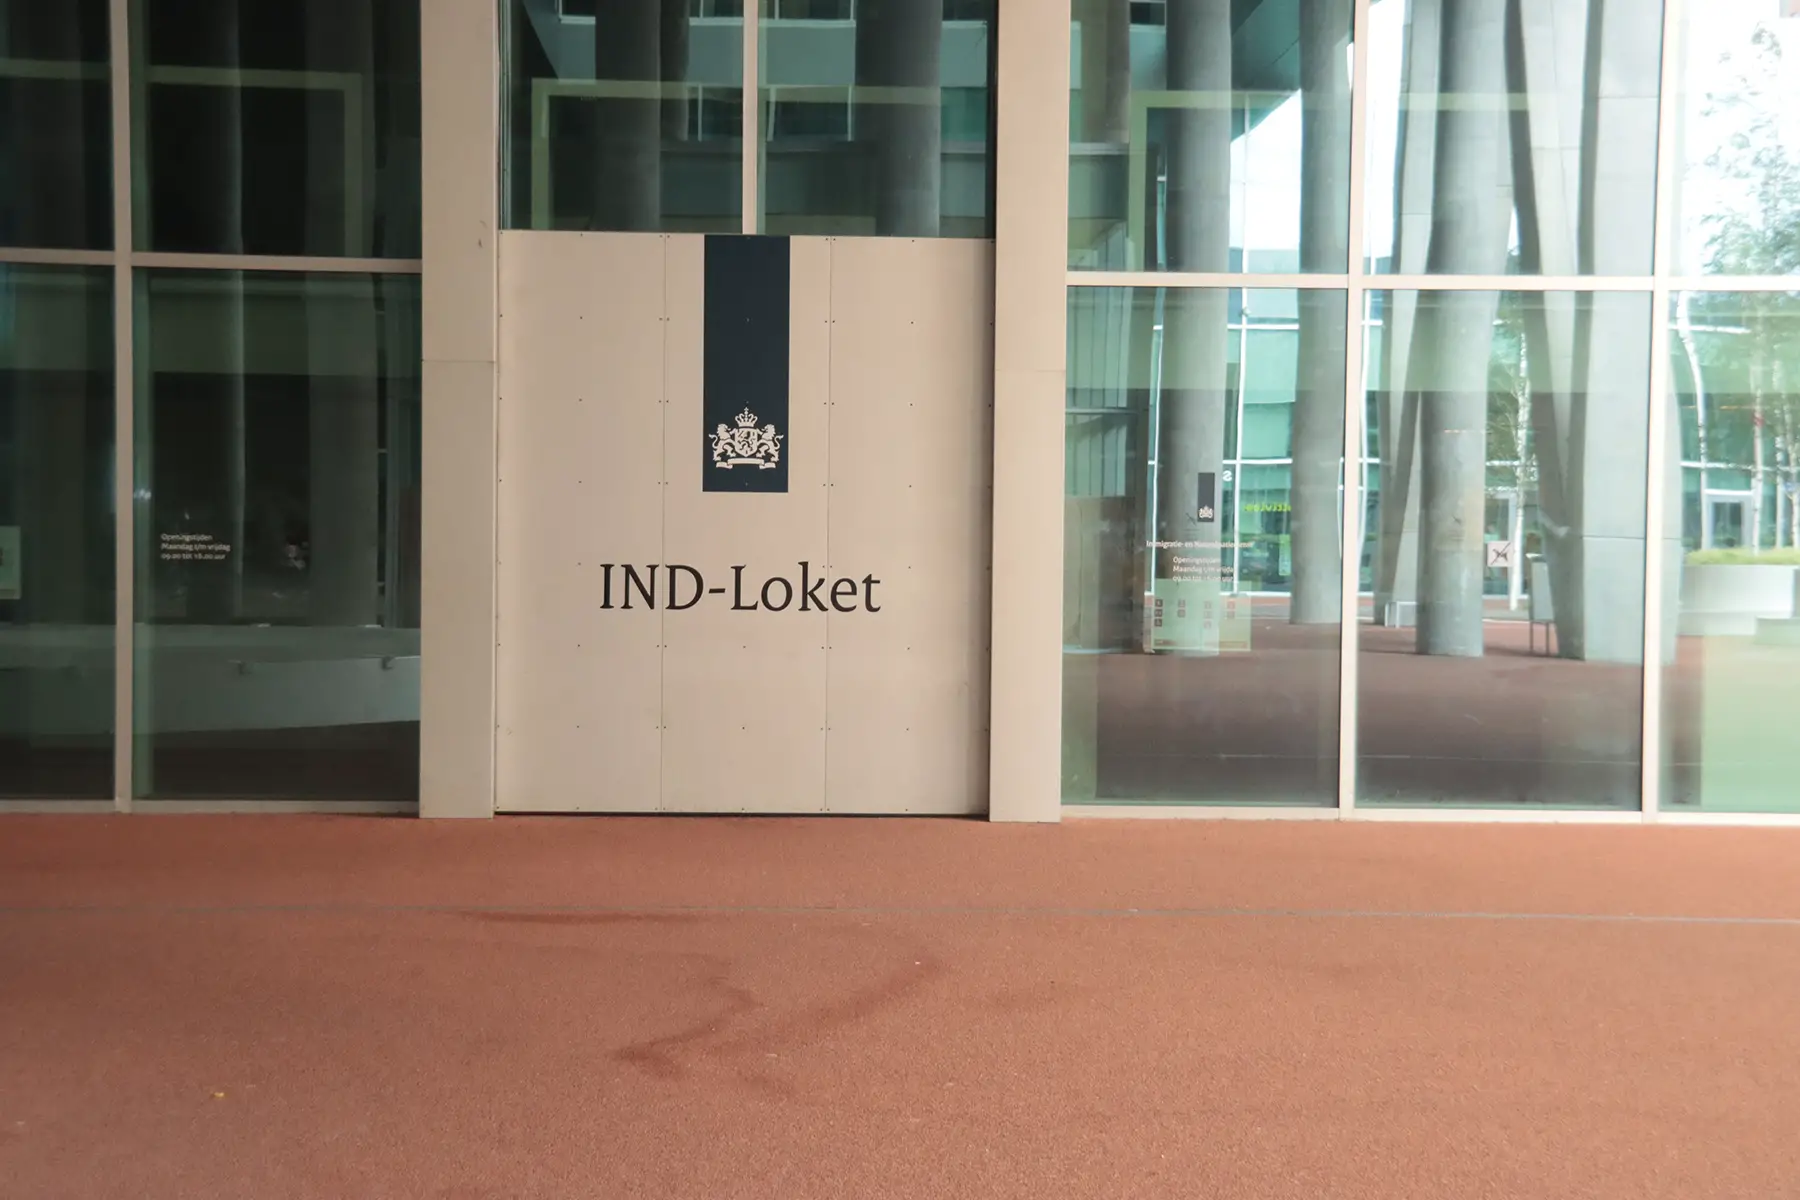 Immigration office in The Hague. Sign says IND-Loket.